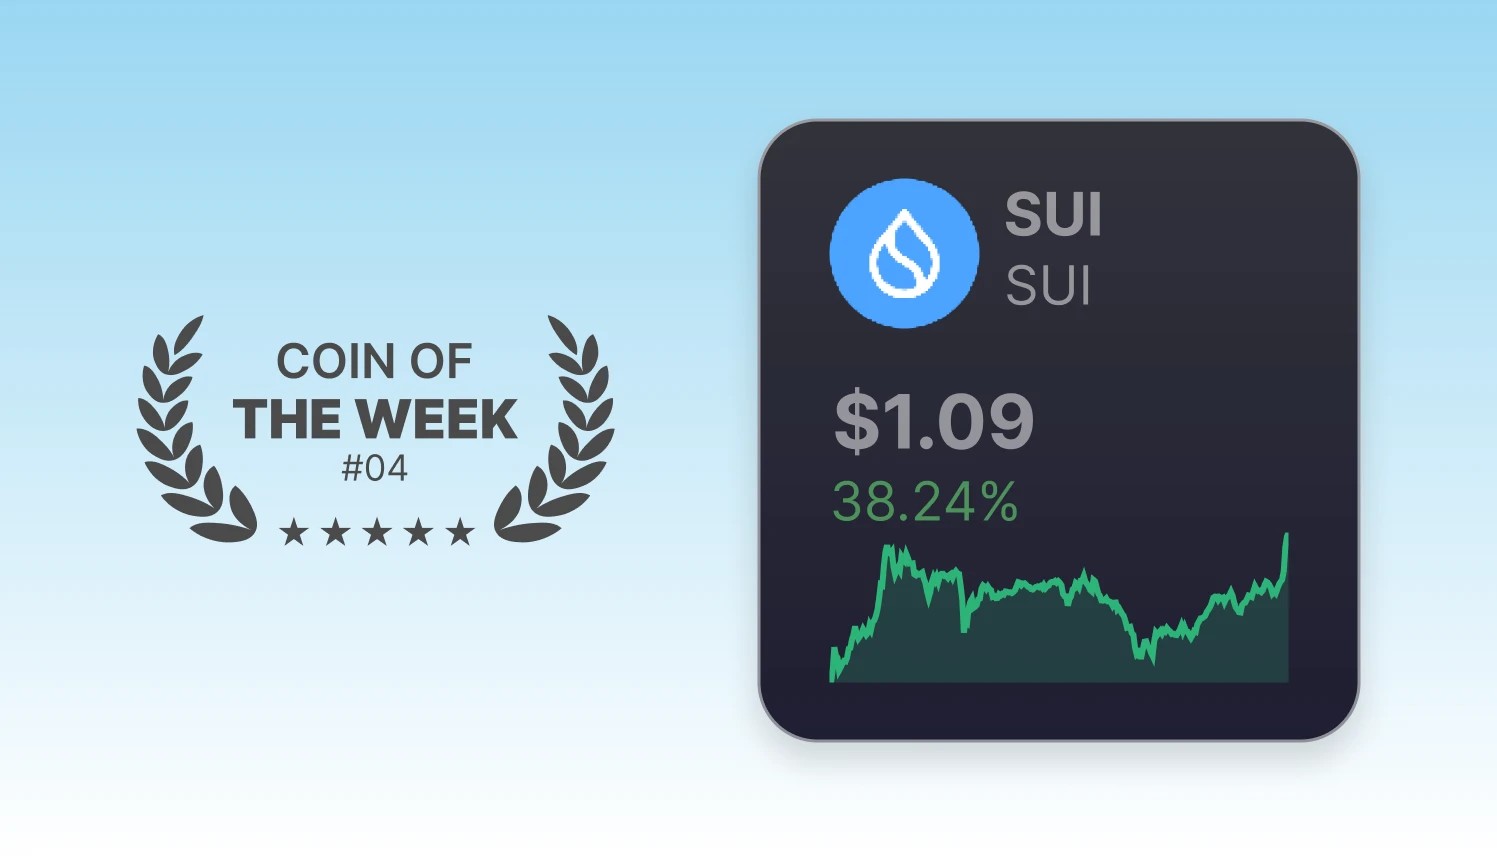 Coin Of The Week - SUI - Week 04